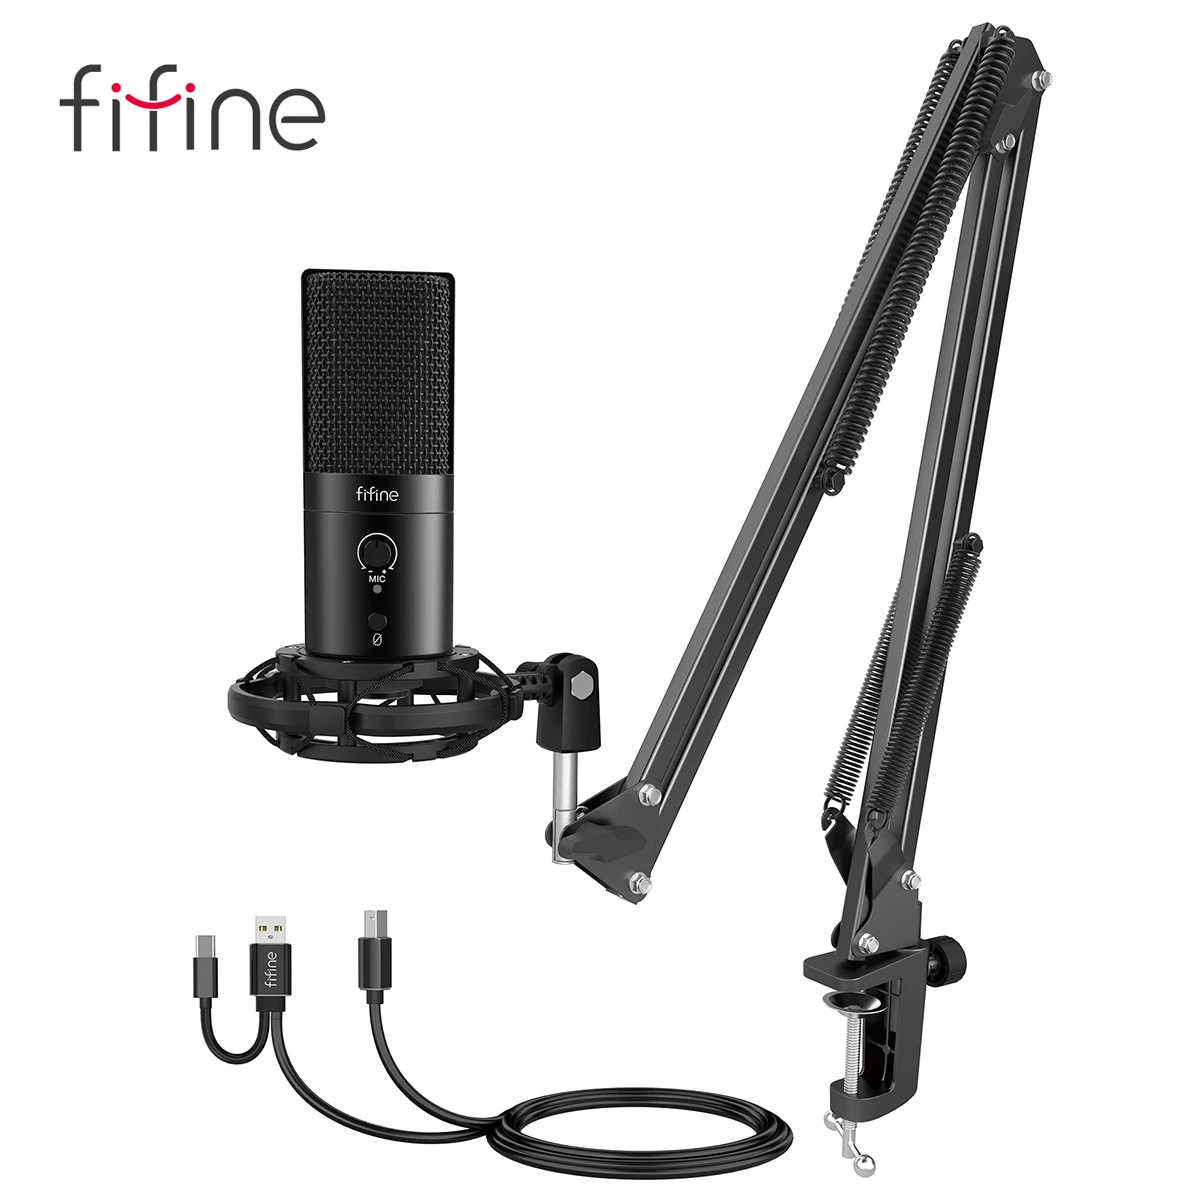 FIFINE USB C&A Gaming Streaming Microphone Kit for PC Computer, Arm Stand Mute Button&Gain,Studio Mic for Podcast Recording-T683